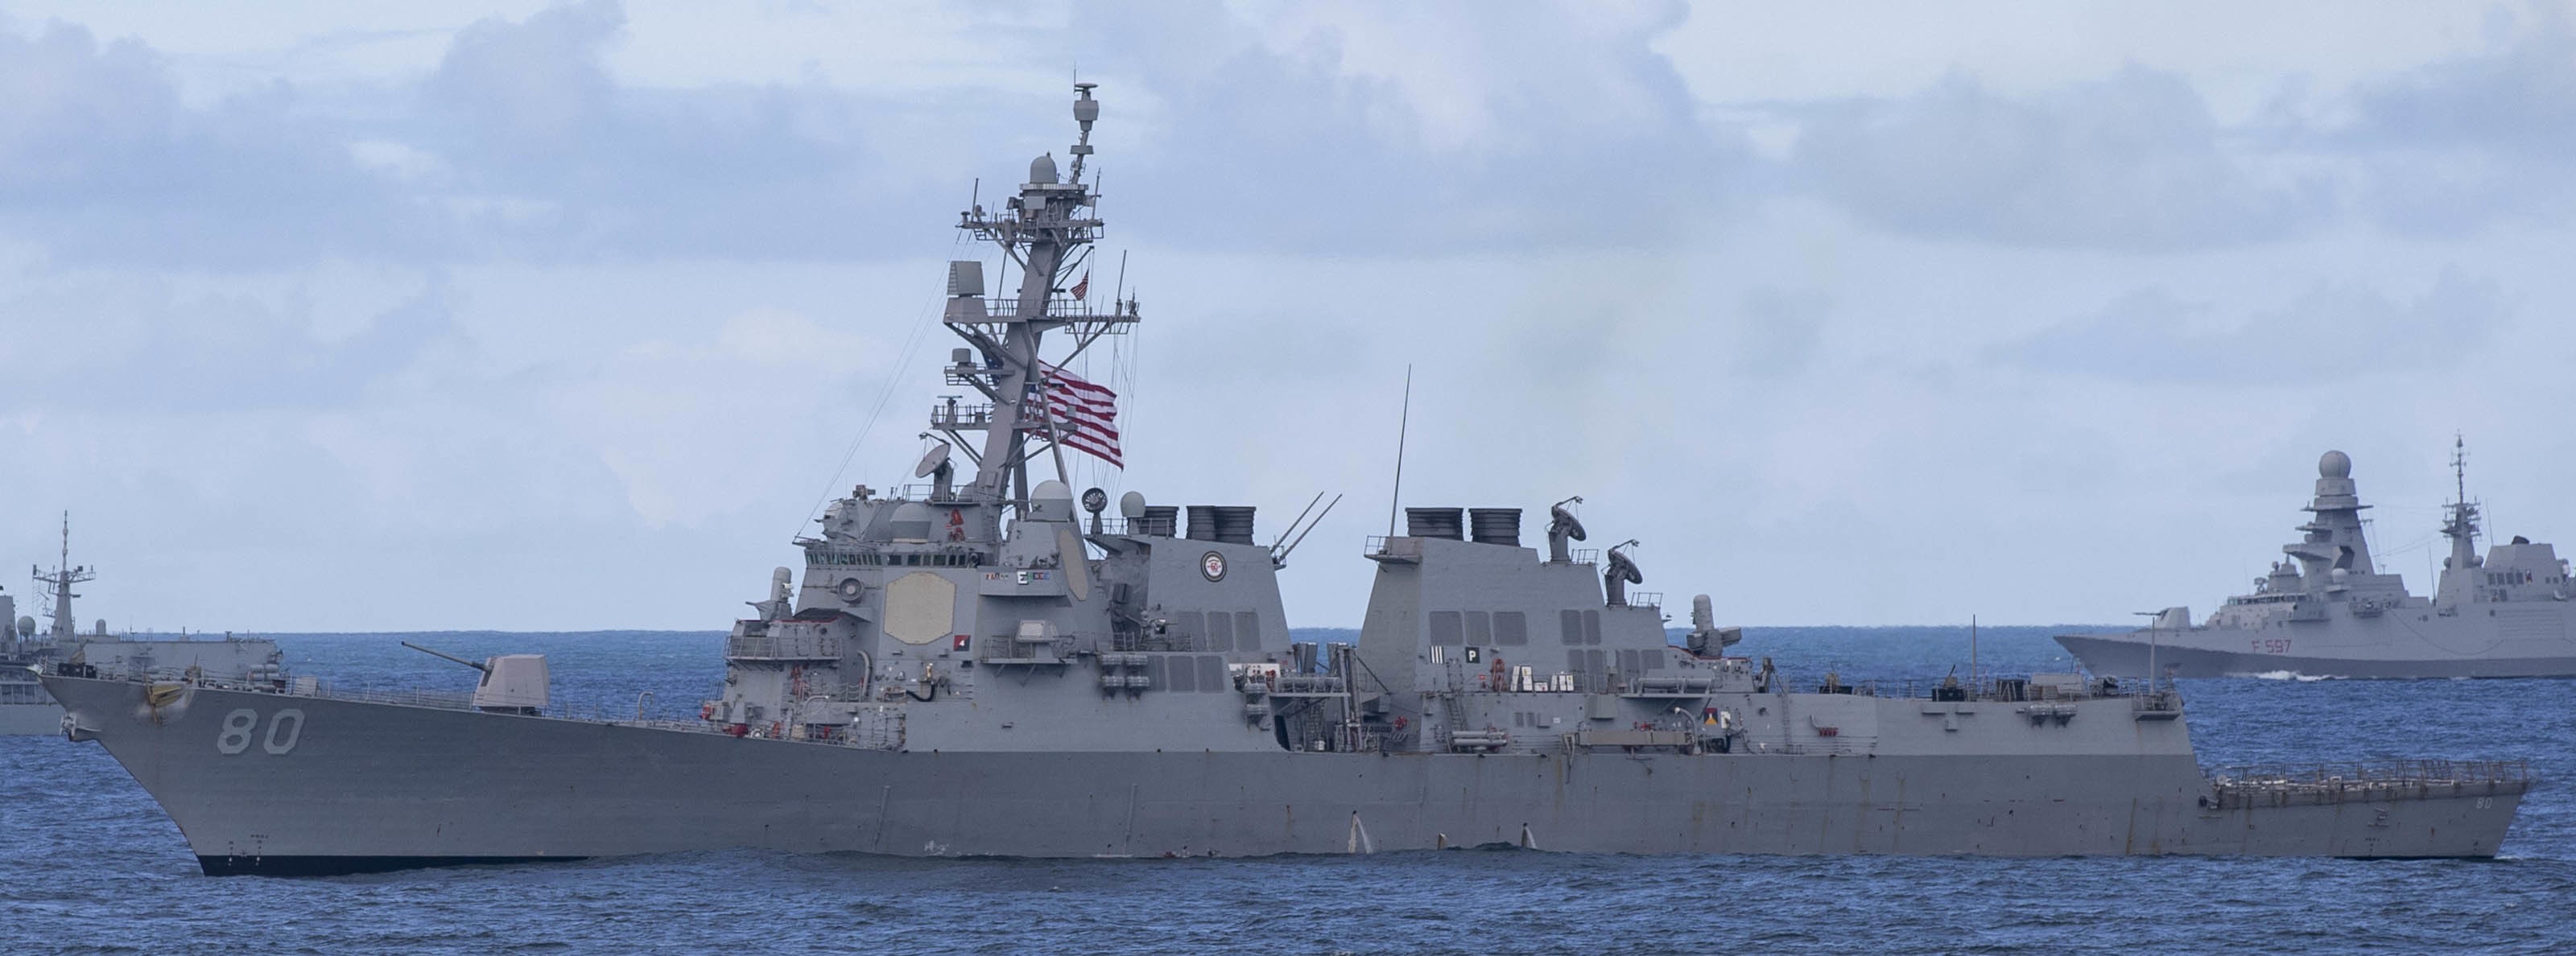 ddg-80 uss roosevelt guided missile destroyer arleigh burke class us navy nato formidable shield 2021 79